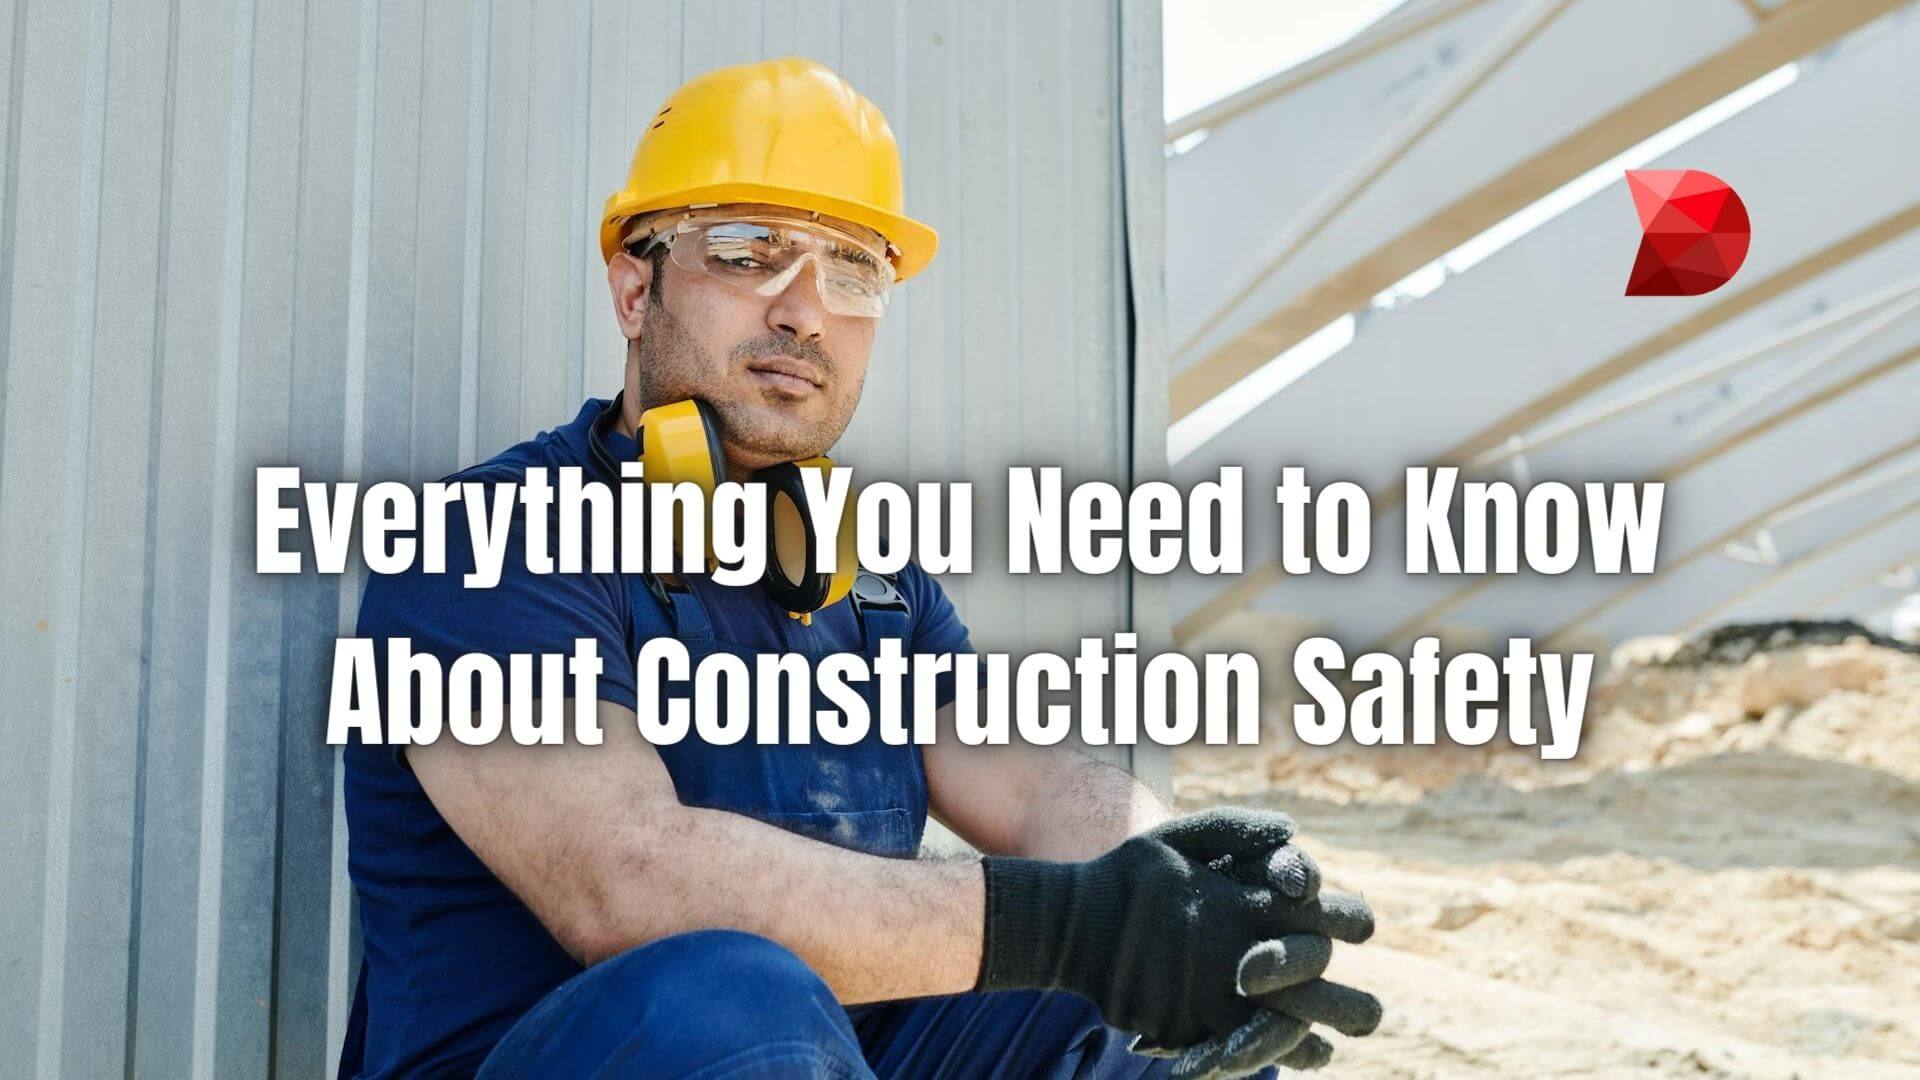 Stay informed on construction safety practices with our guide. Learn risk assessment, protective gear, and emergency protocols here.